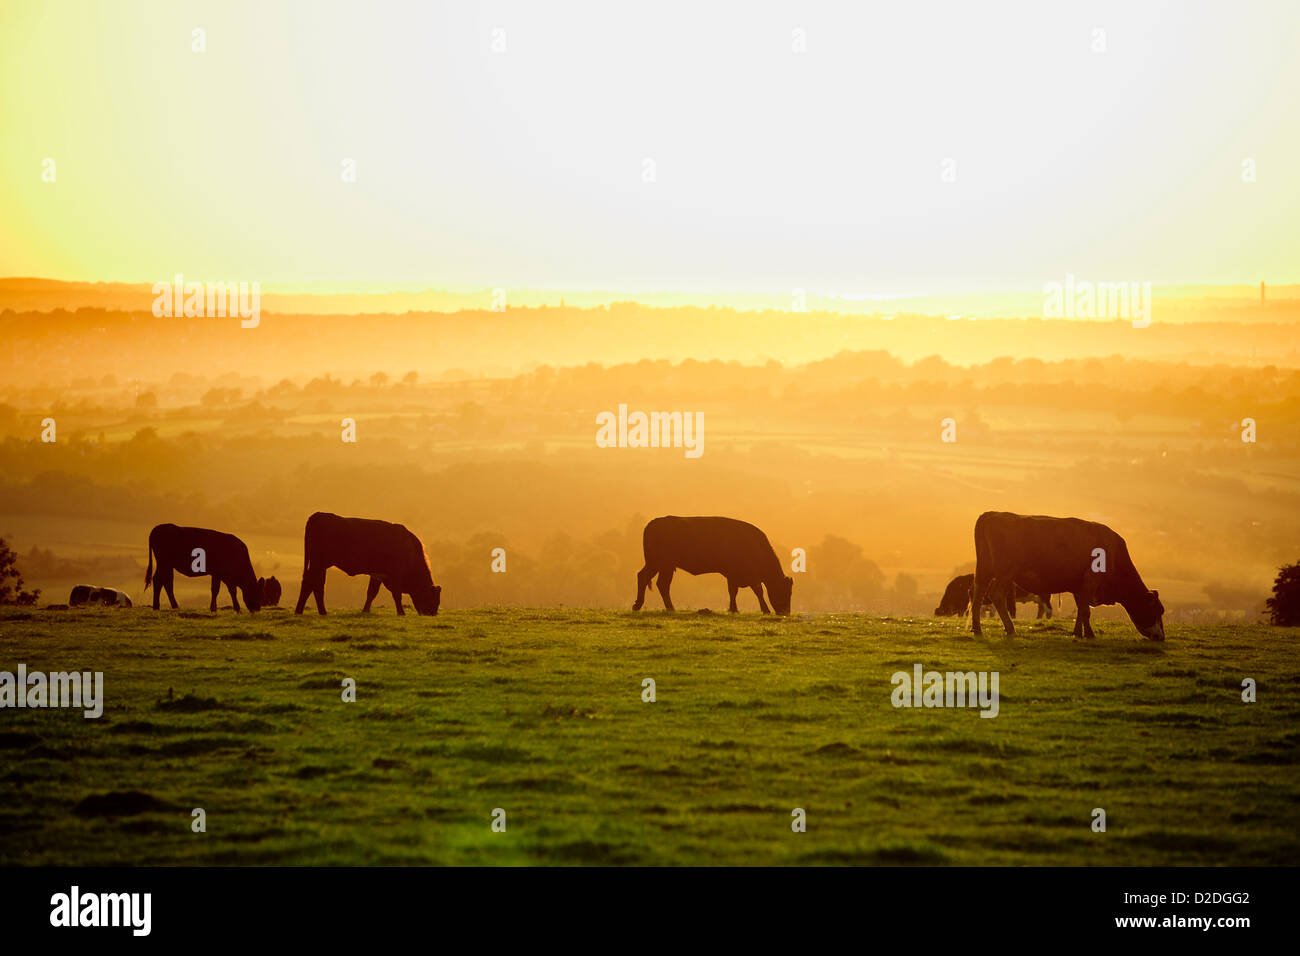 Backlit cattle grazing in a field at sunset. Stock Photo